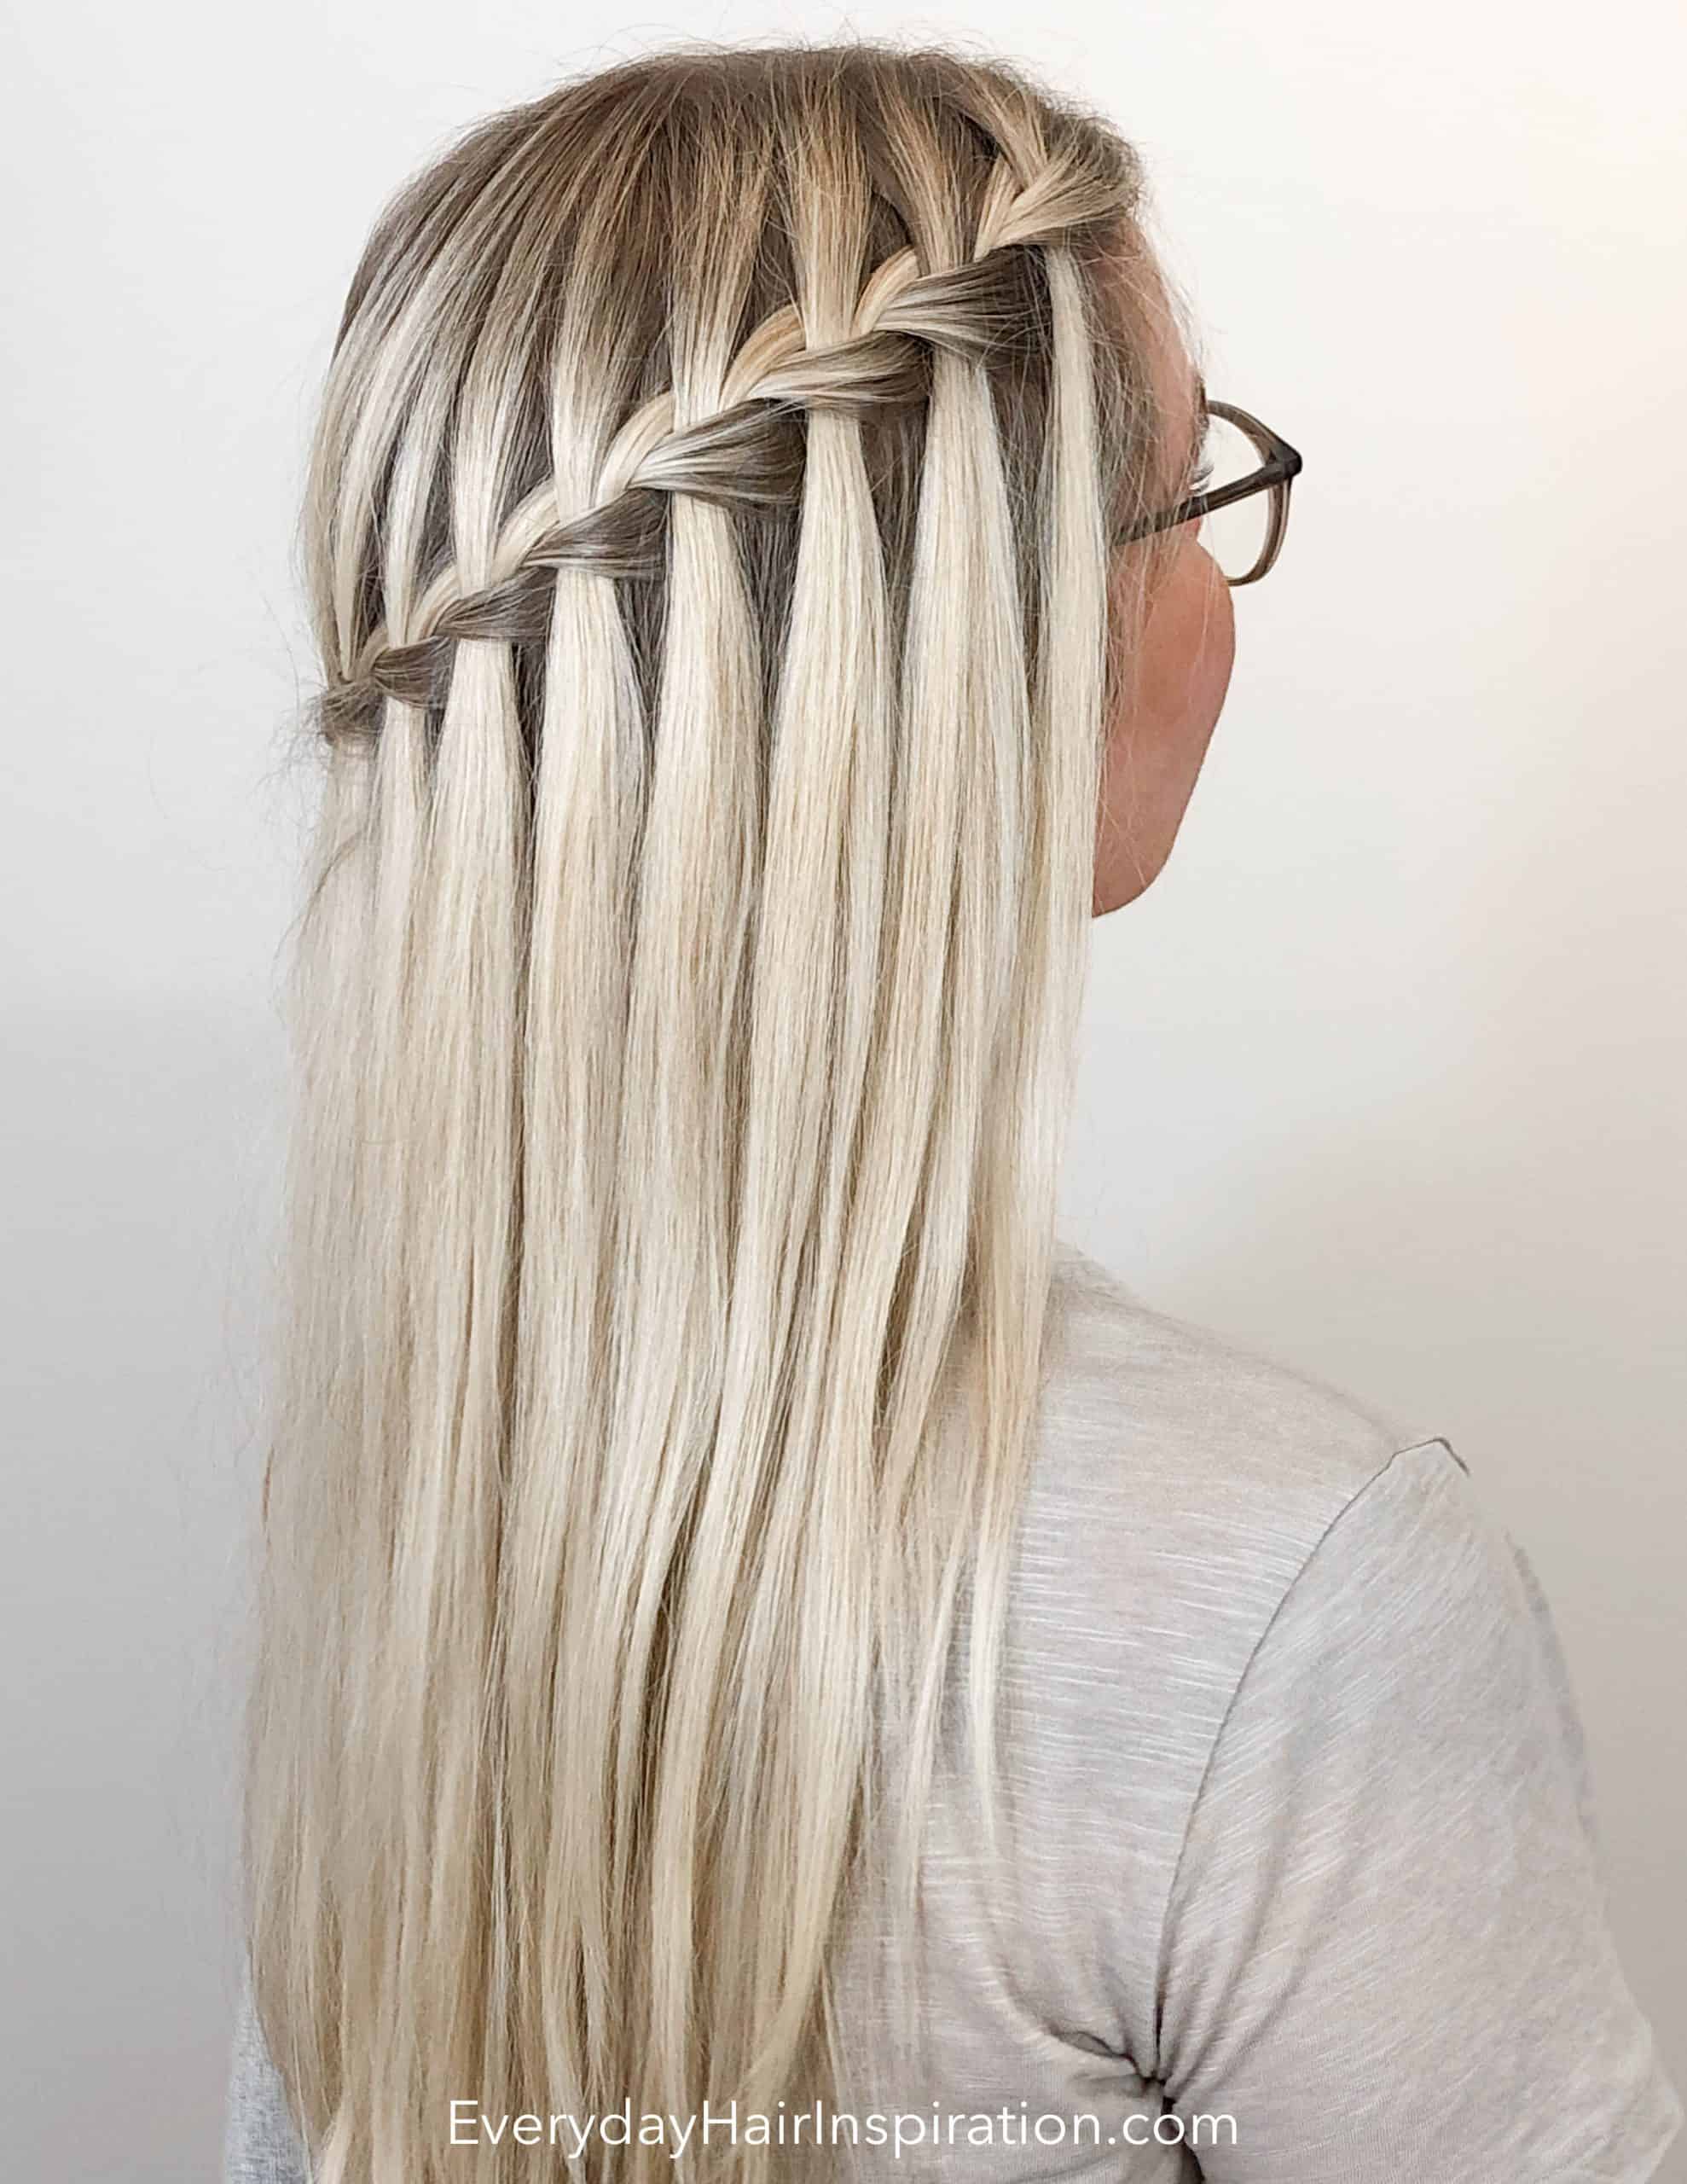 How To Waterfall Braid Your Own Hair - With Step by Step Video - Everyday  Hair inspiration